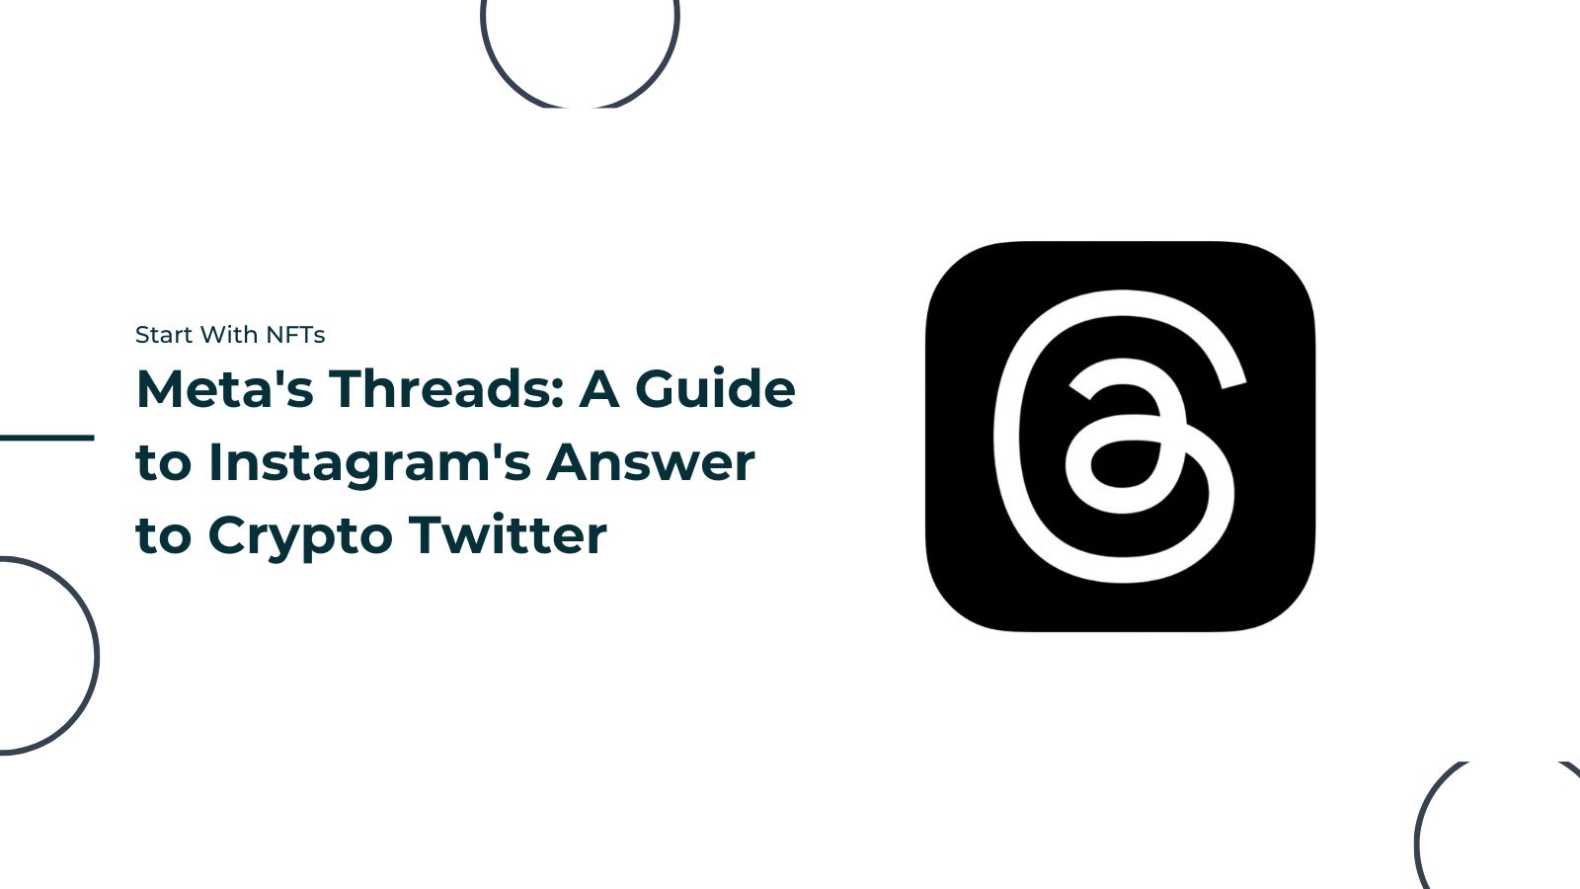 Meta's Threads: A Guide to Instagram's Answer to Crypto Twitter